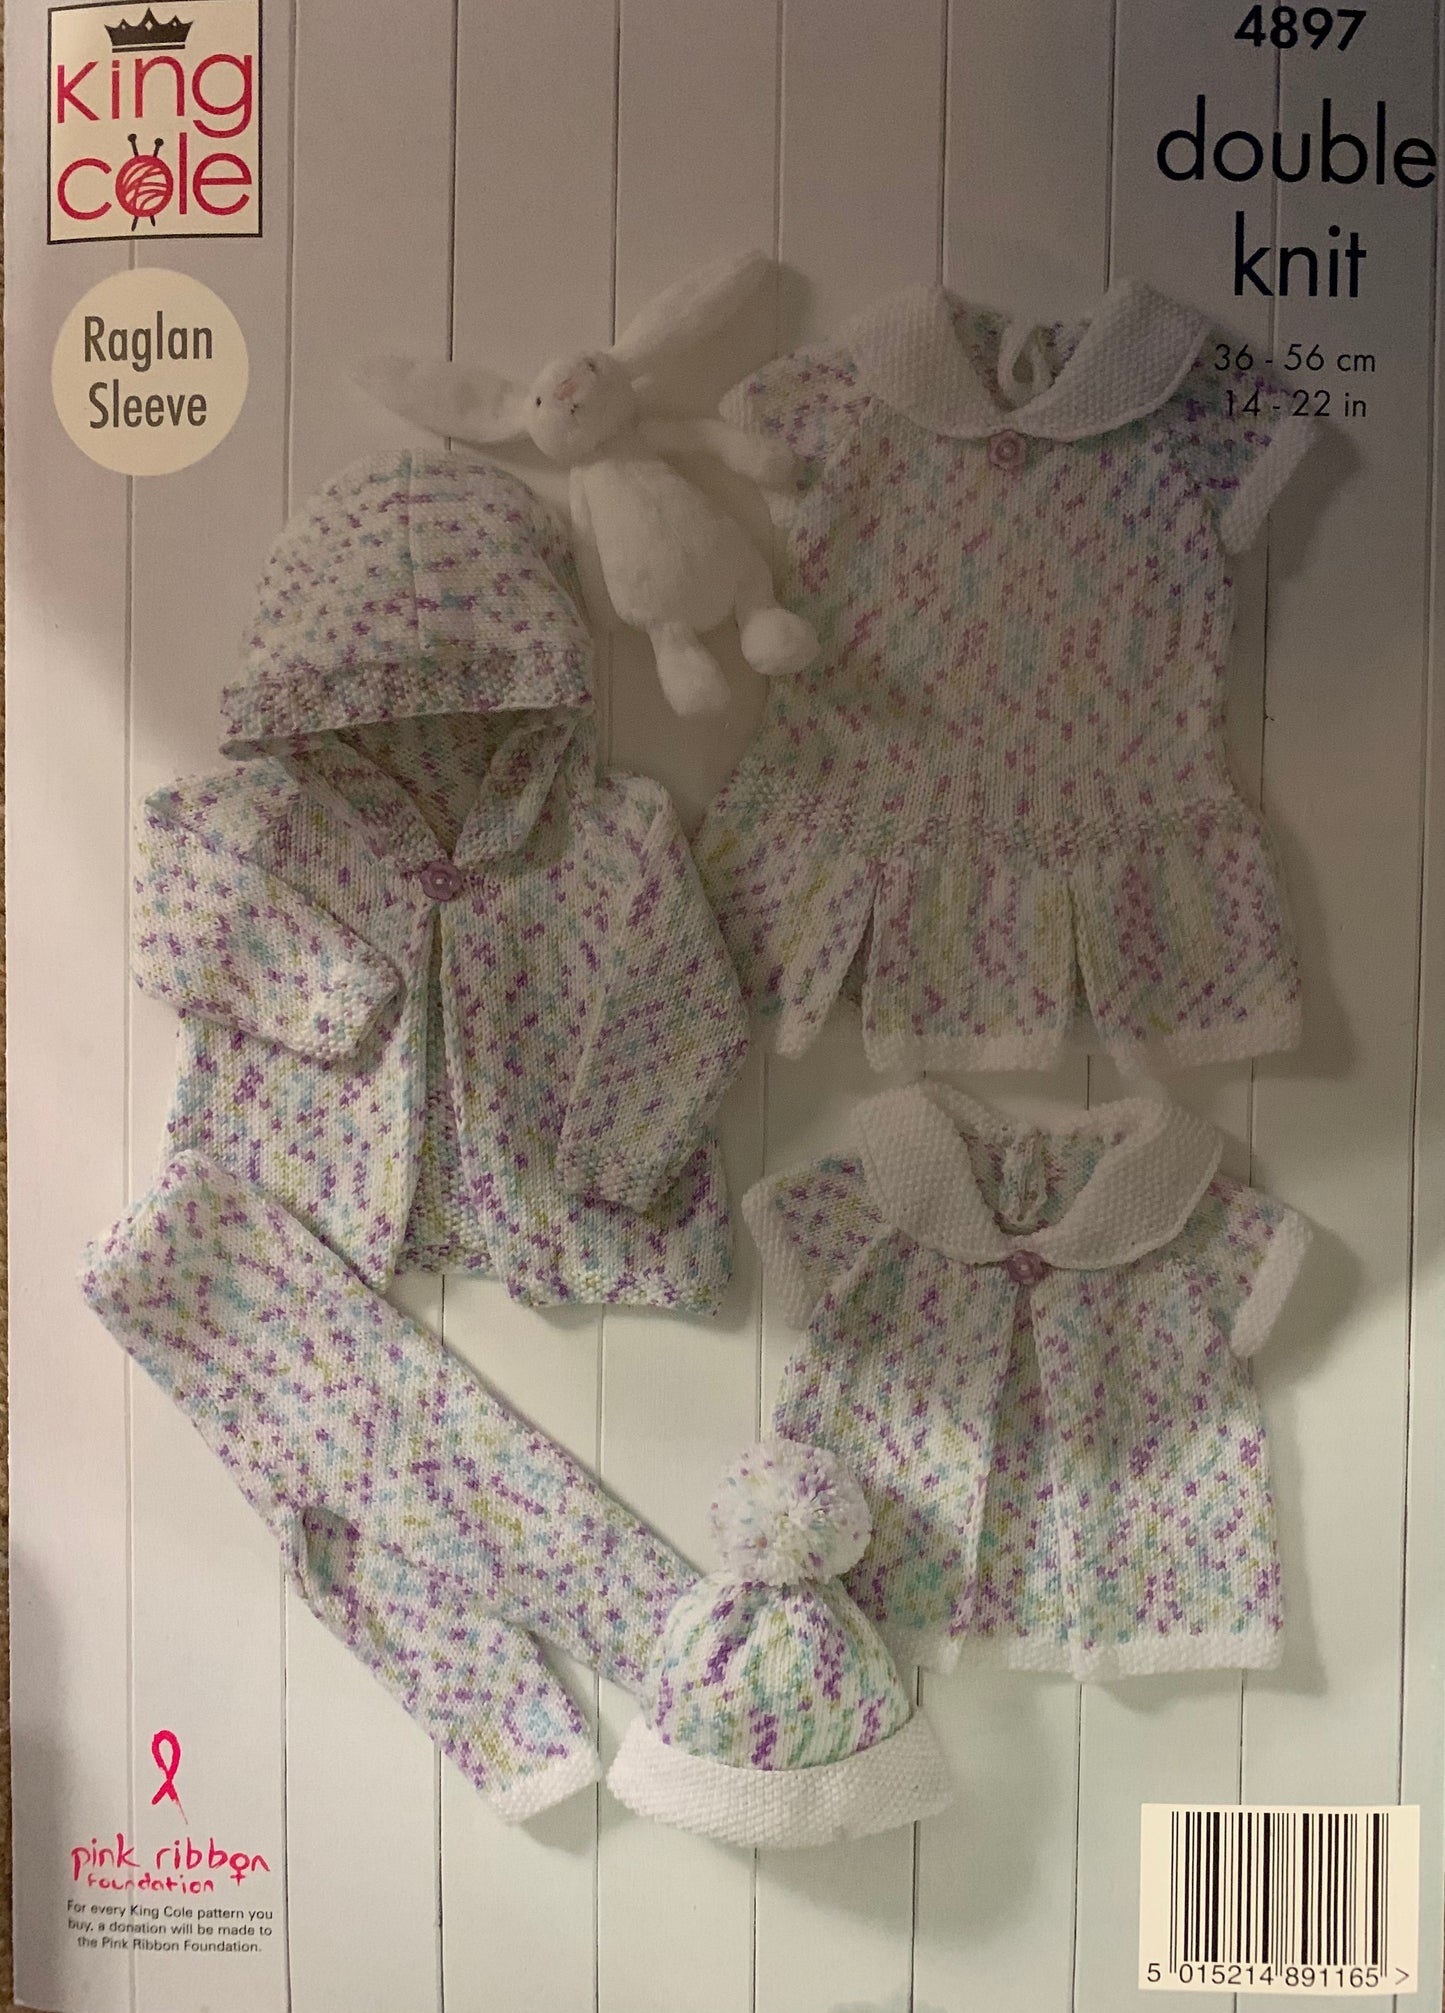 4897 King Cole double knit baby dress, hoodie, top, hat and leggings knitting pattern